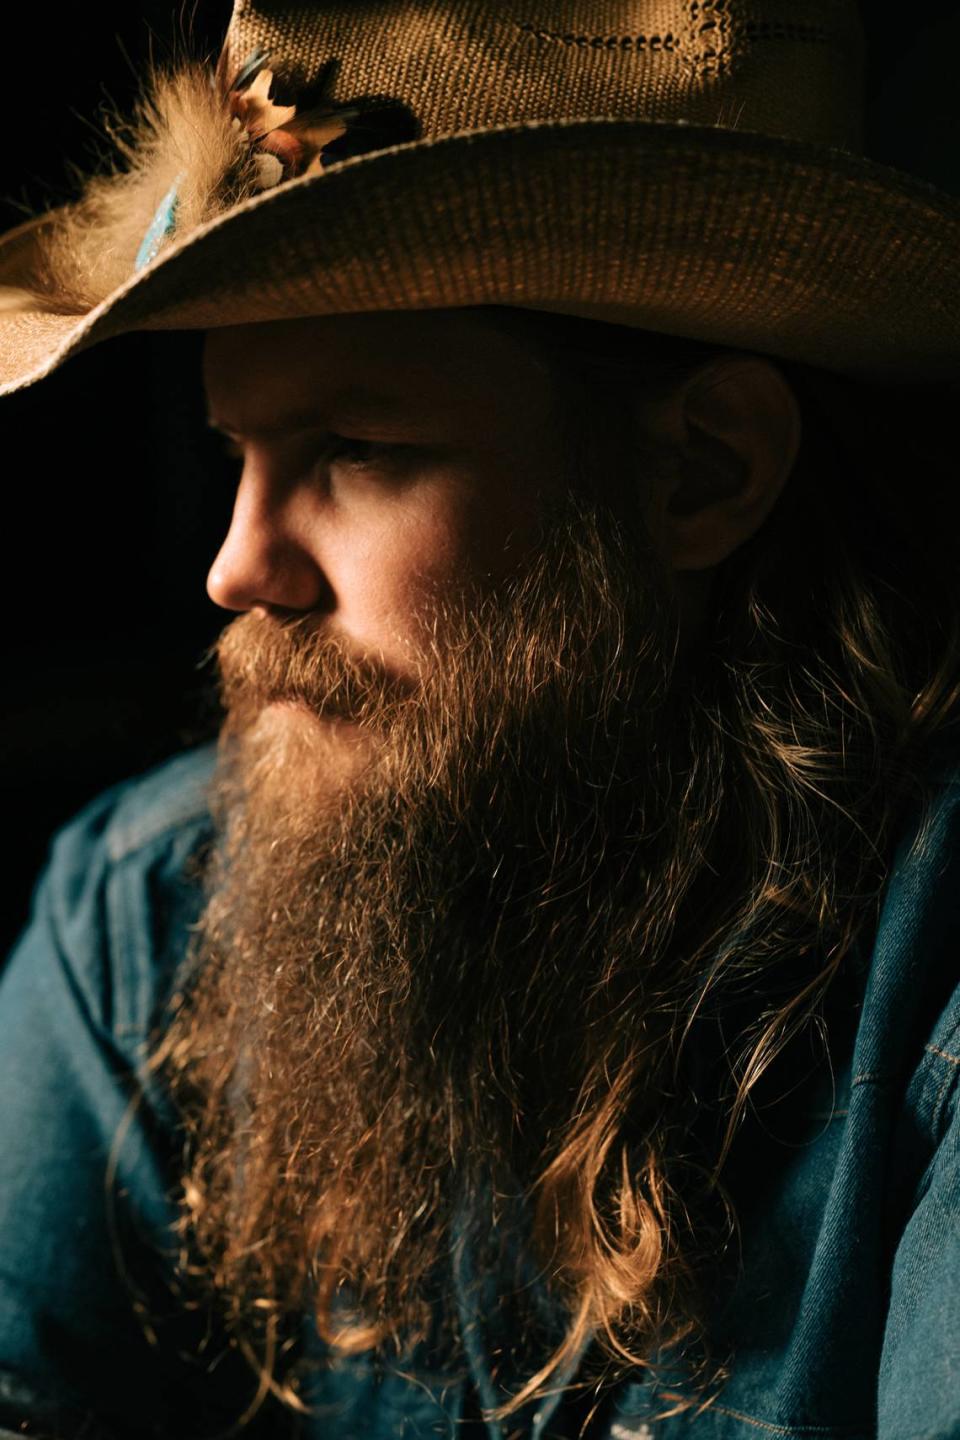 Chris Stapleton is releasing a new 15-song album called “Higher” that may be his best recorded work yet, according to music critic Walter Tunis. Provided